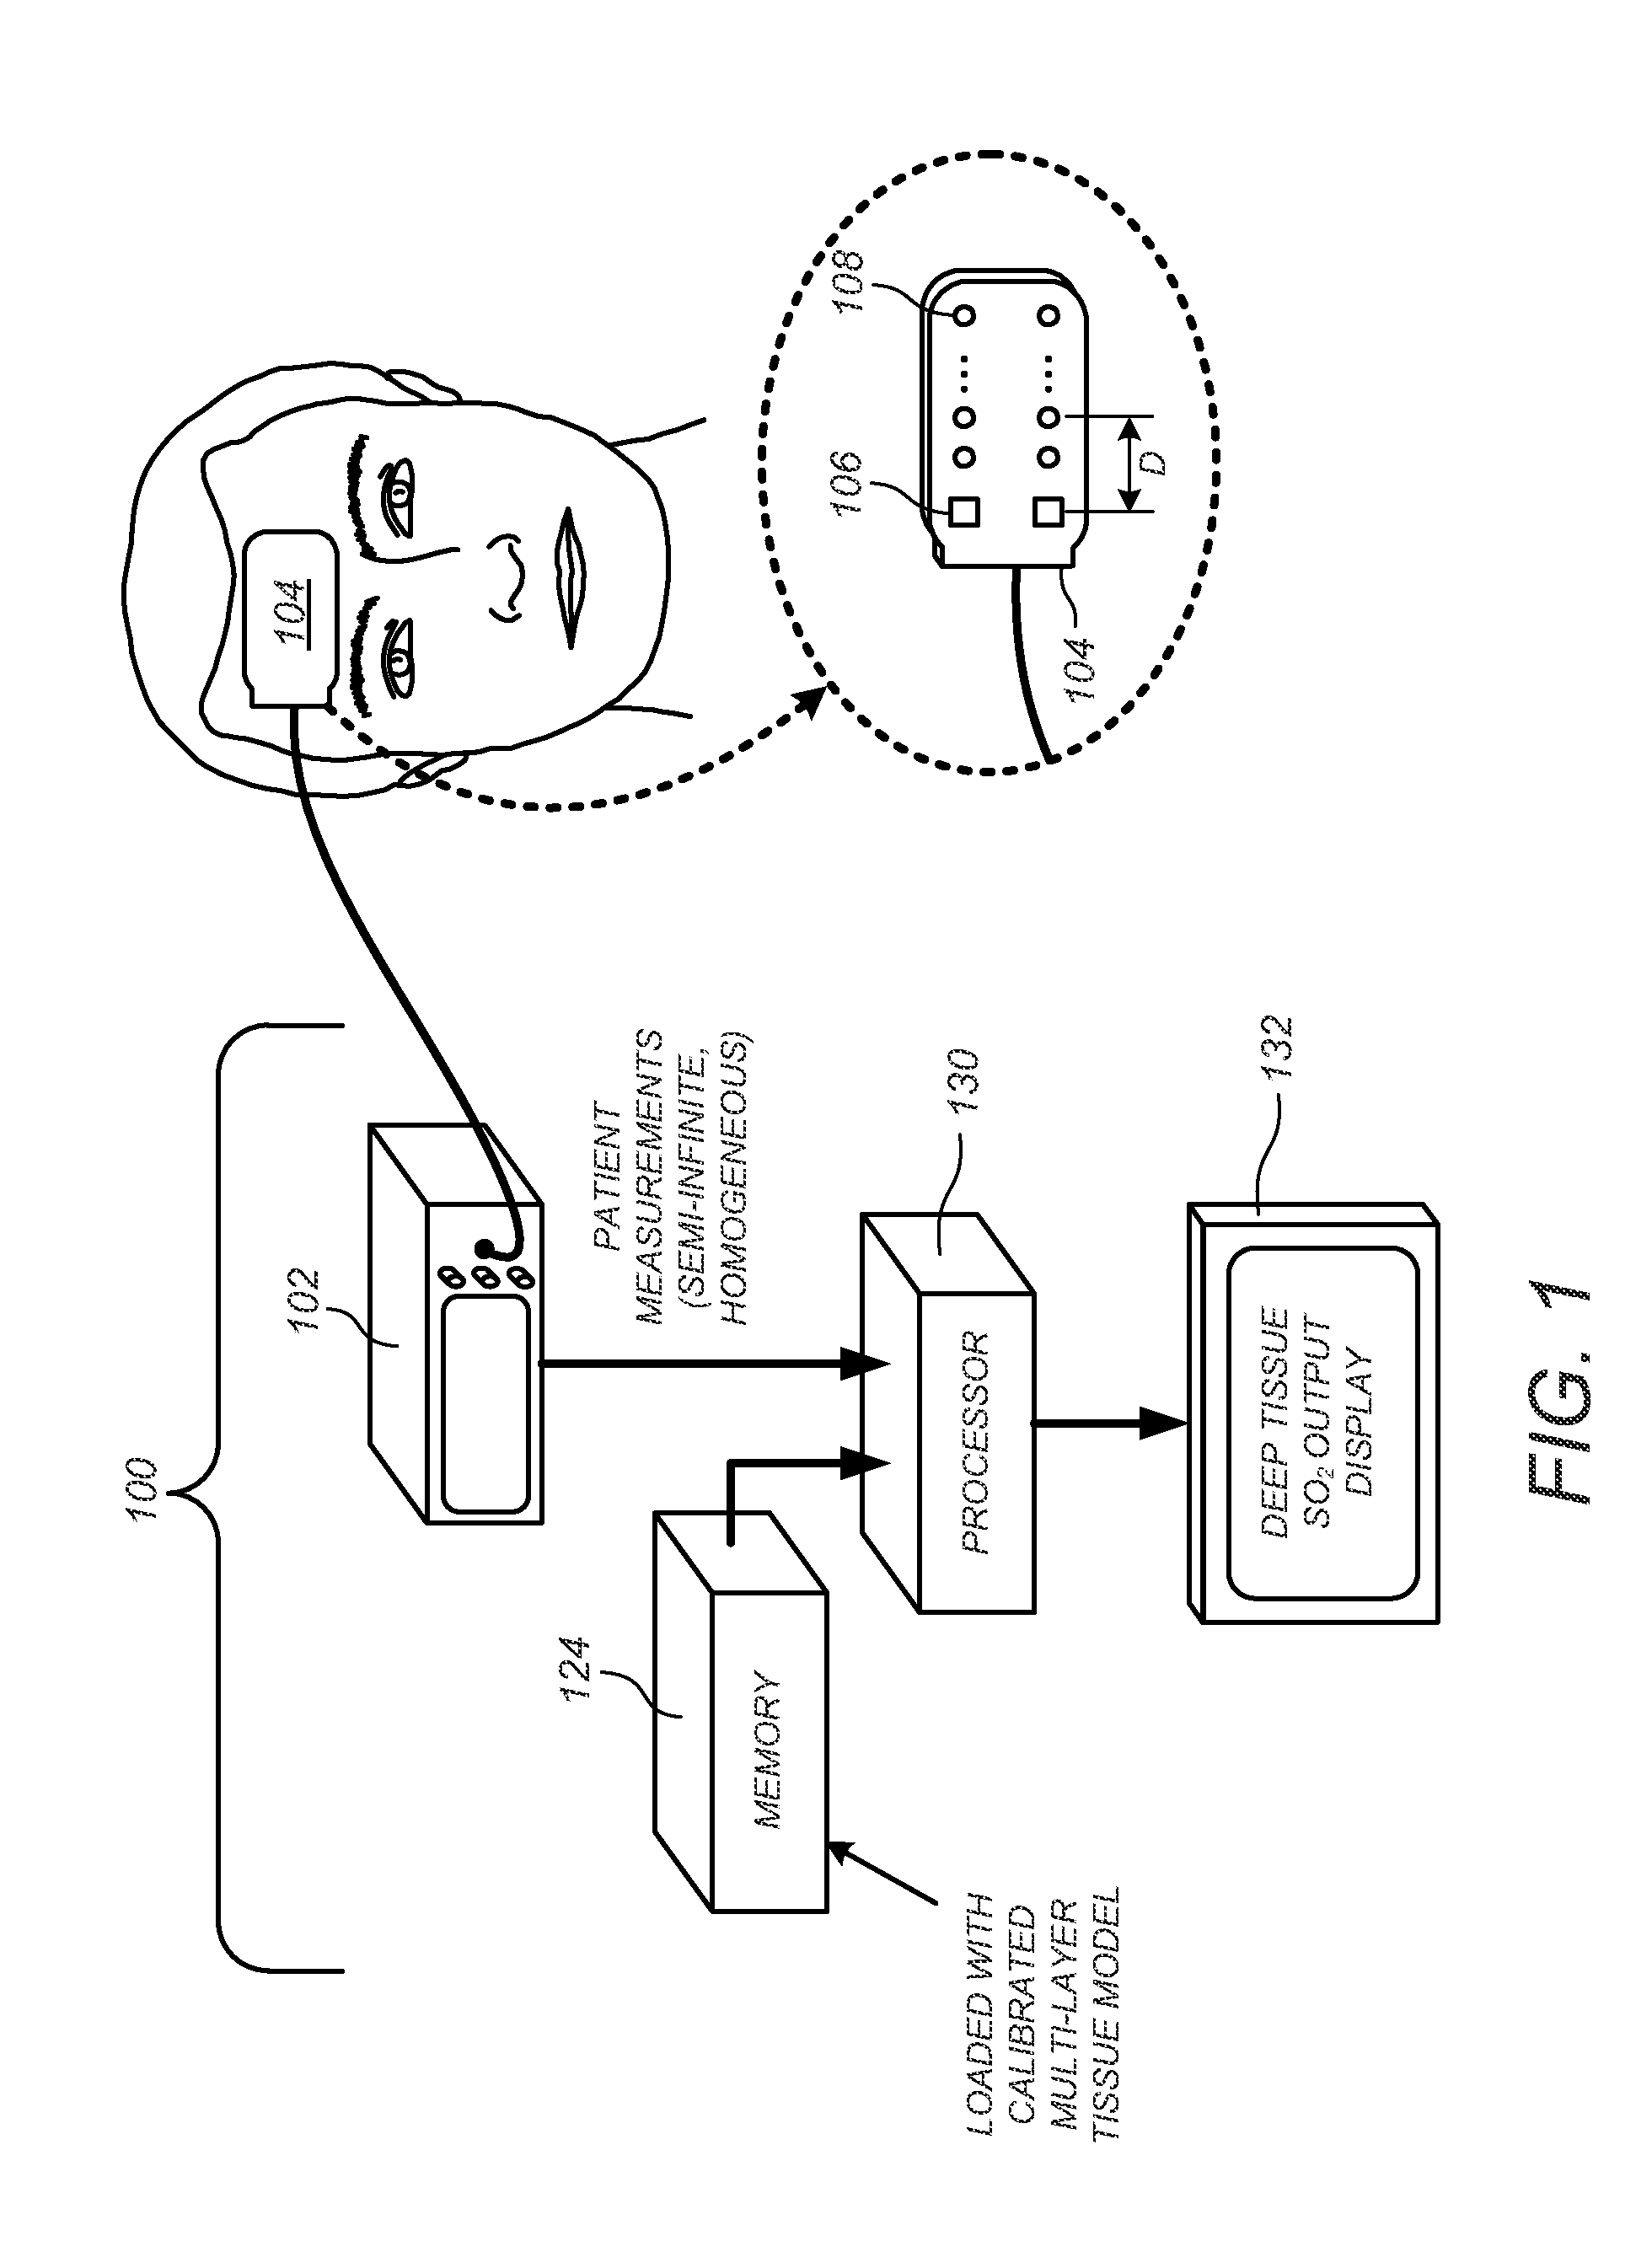 Spectrophotometric Monitoring Of Multiple Layer Tissue Structures